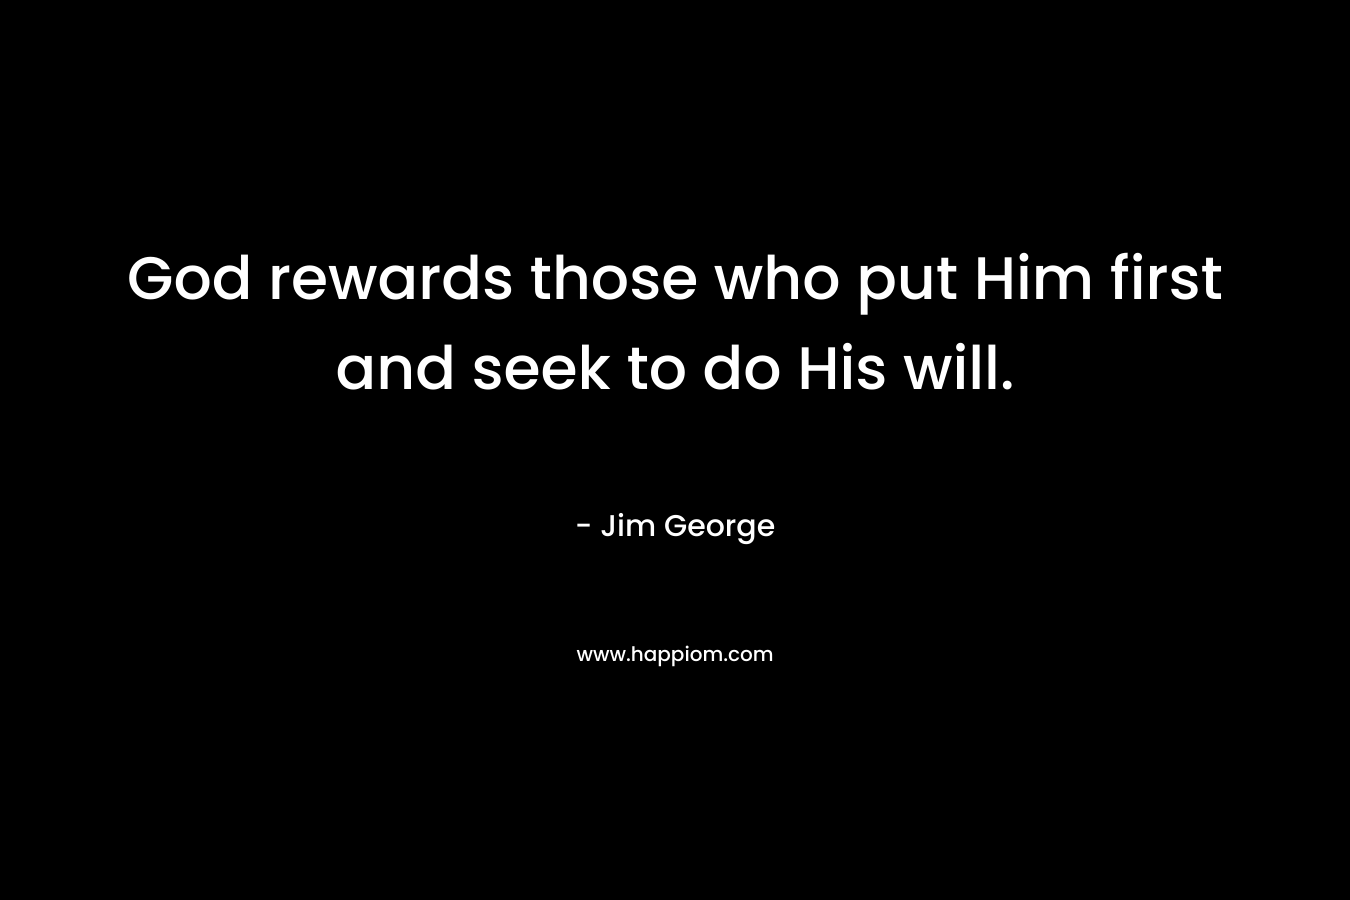 God rewards those who put Him first and seek to do His will. – Jim George